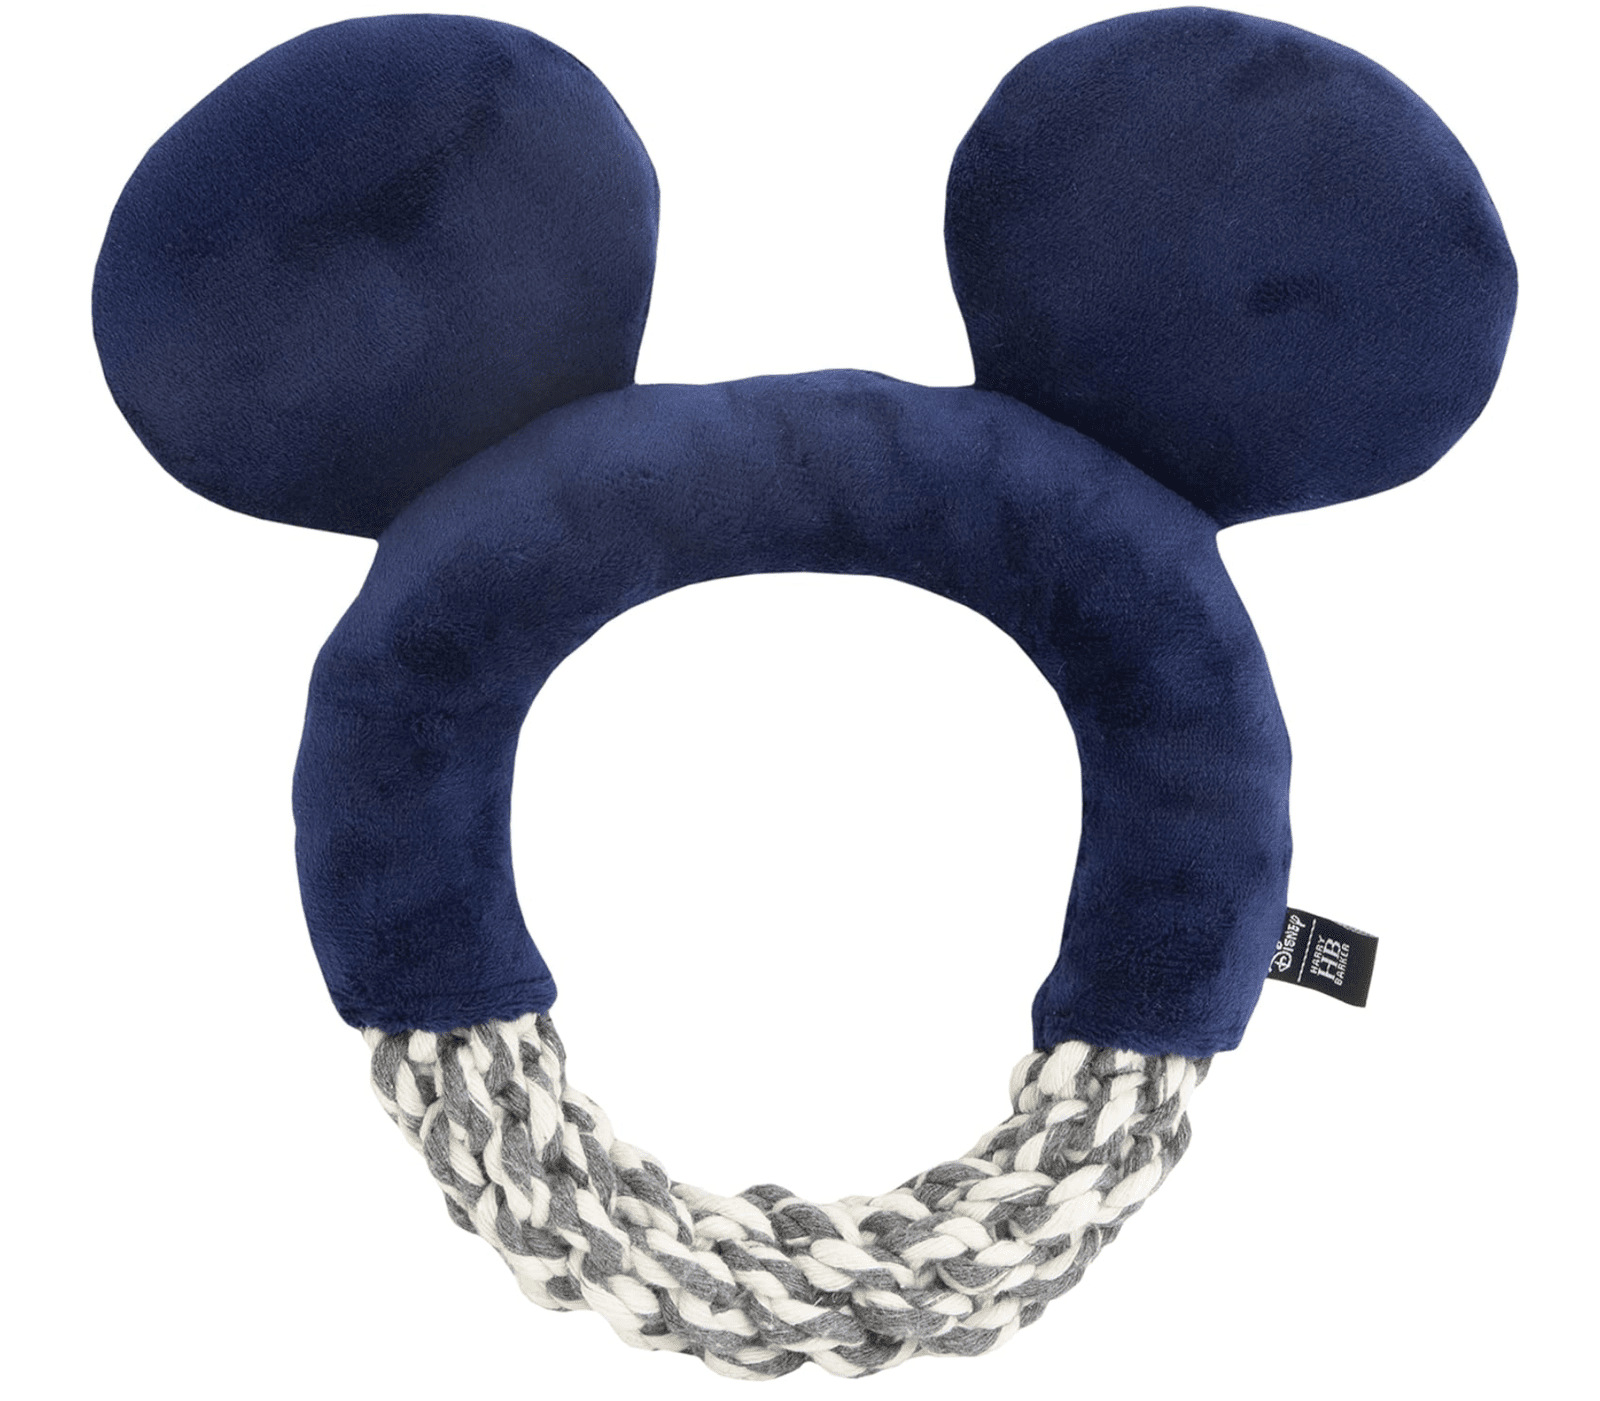 NEW! Harry Barker Disney Mickey Mouse Ears Braided Rope Toy